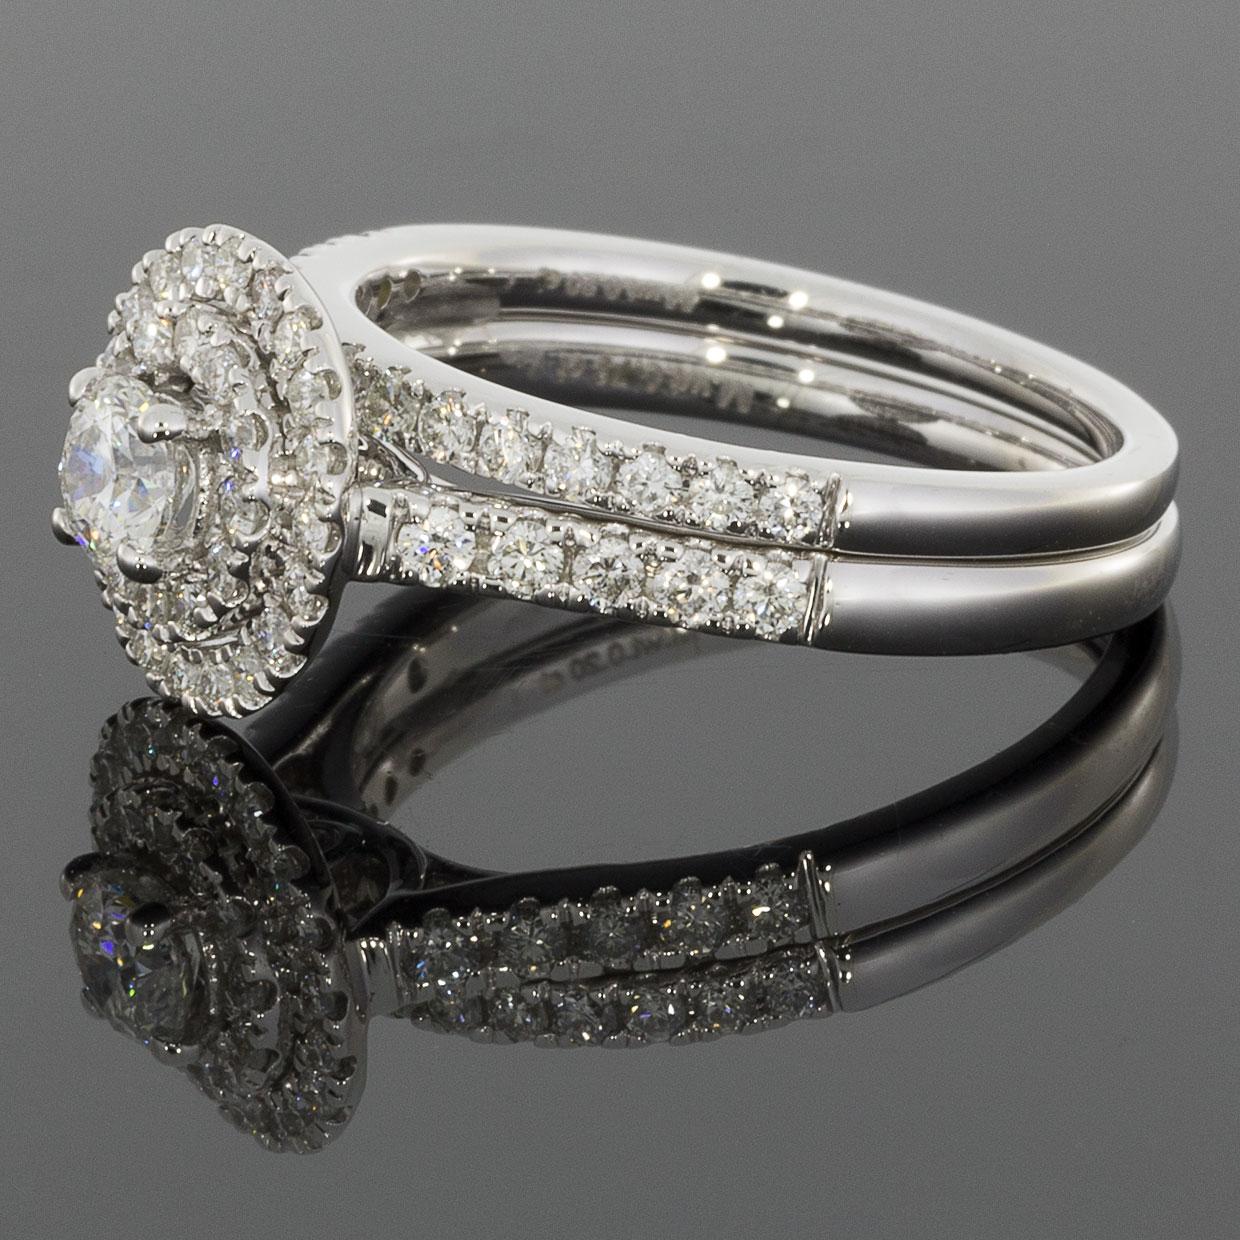 Item Details:
Estimated Retail - $3,550.00
Metal - White Gold
Total Carat Weight (TCW) - 0.96 ctw
Style - Double Halo Wedding Set
Ring Size - 6.50
Sizable - Yes
Metal Purity - 14k

Stone 1 Information:
Stone Type - Diamond
Stone Shape - Round